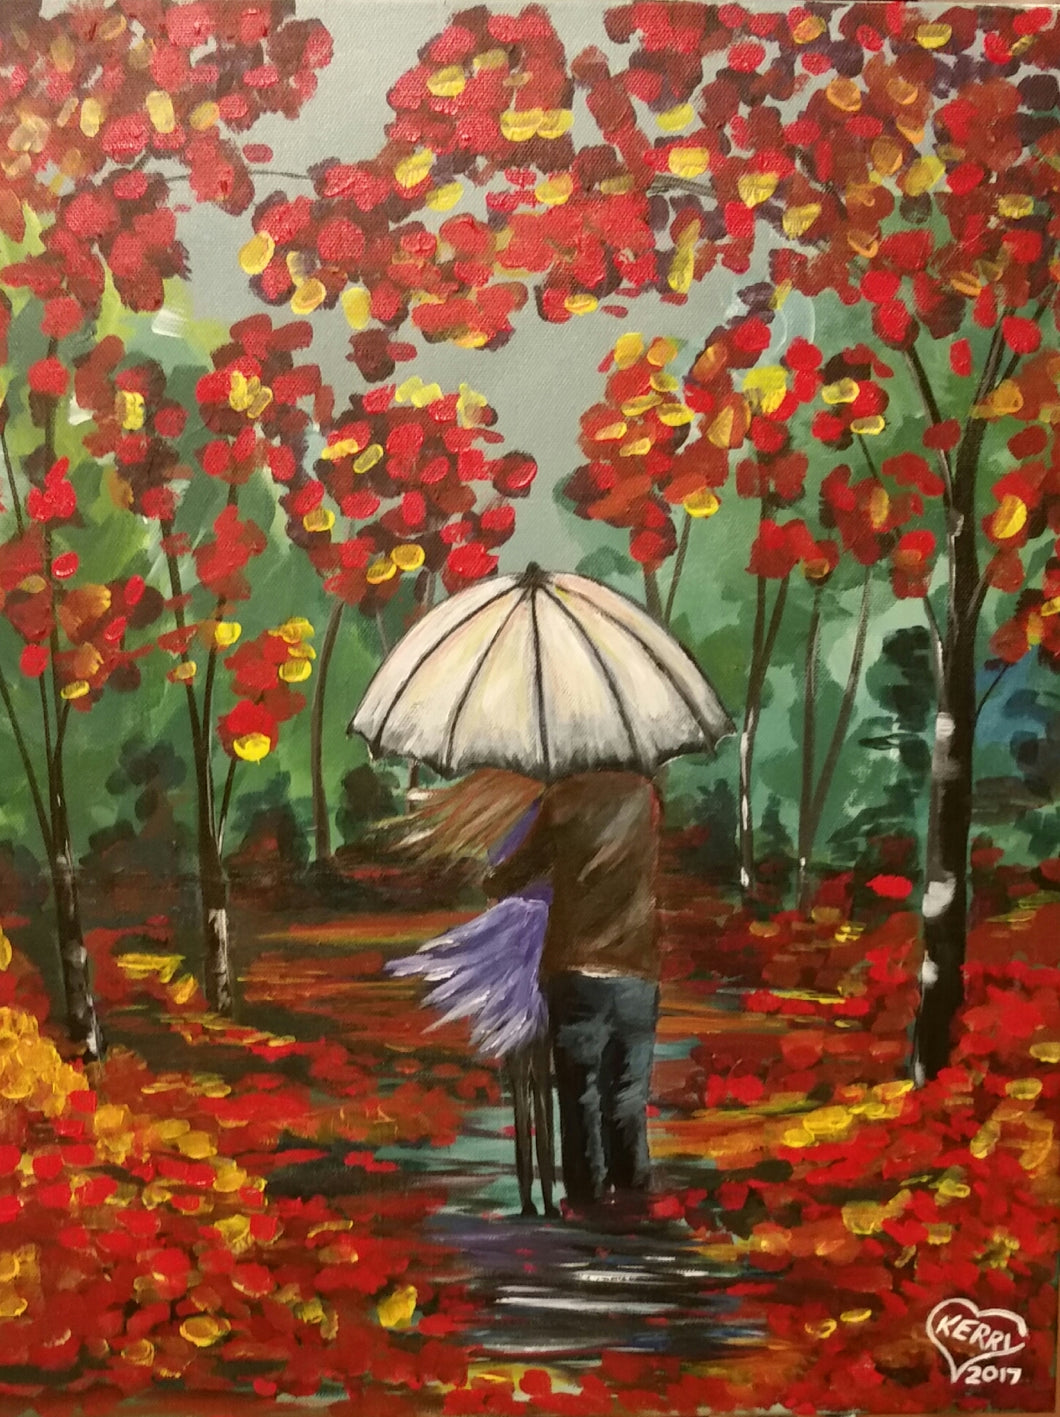 original painting of a couple under an umbrella surrounded by autumn / fall coloured leaves